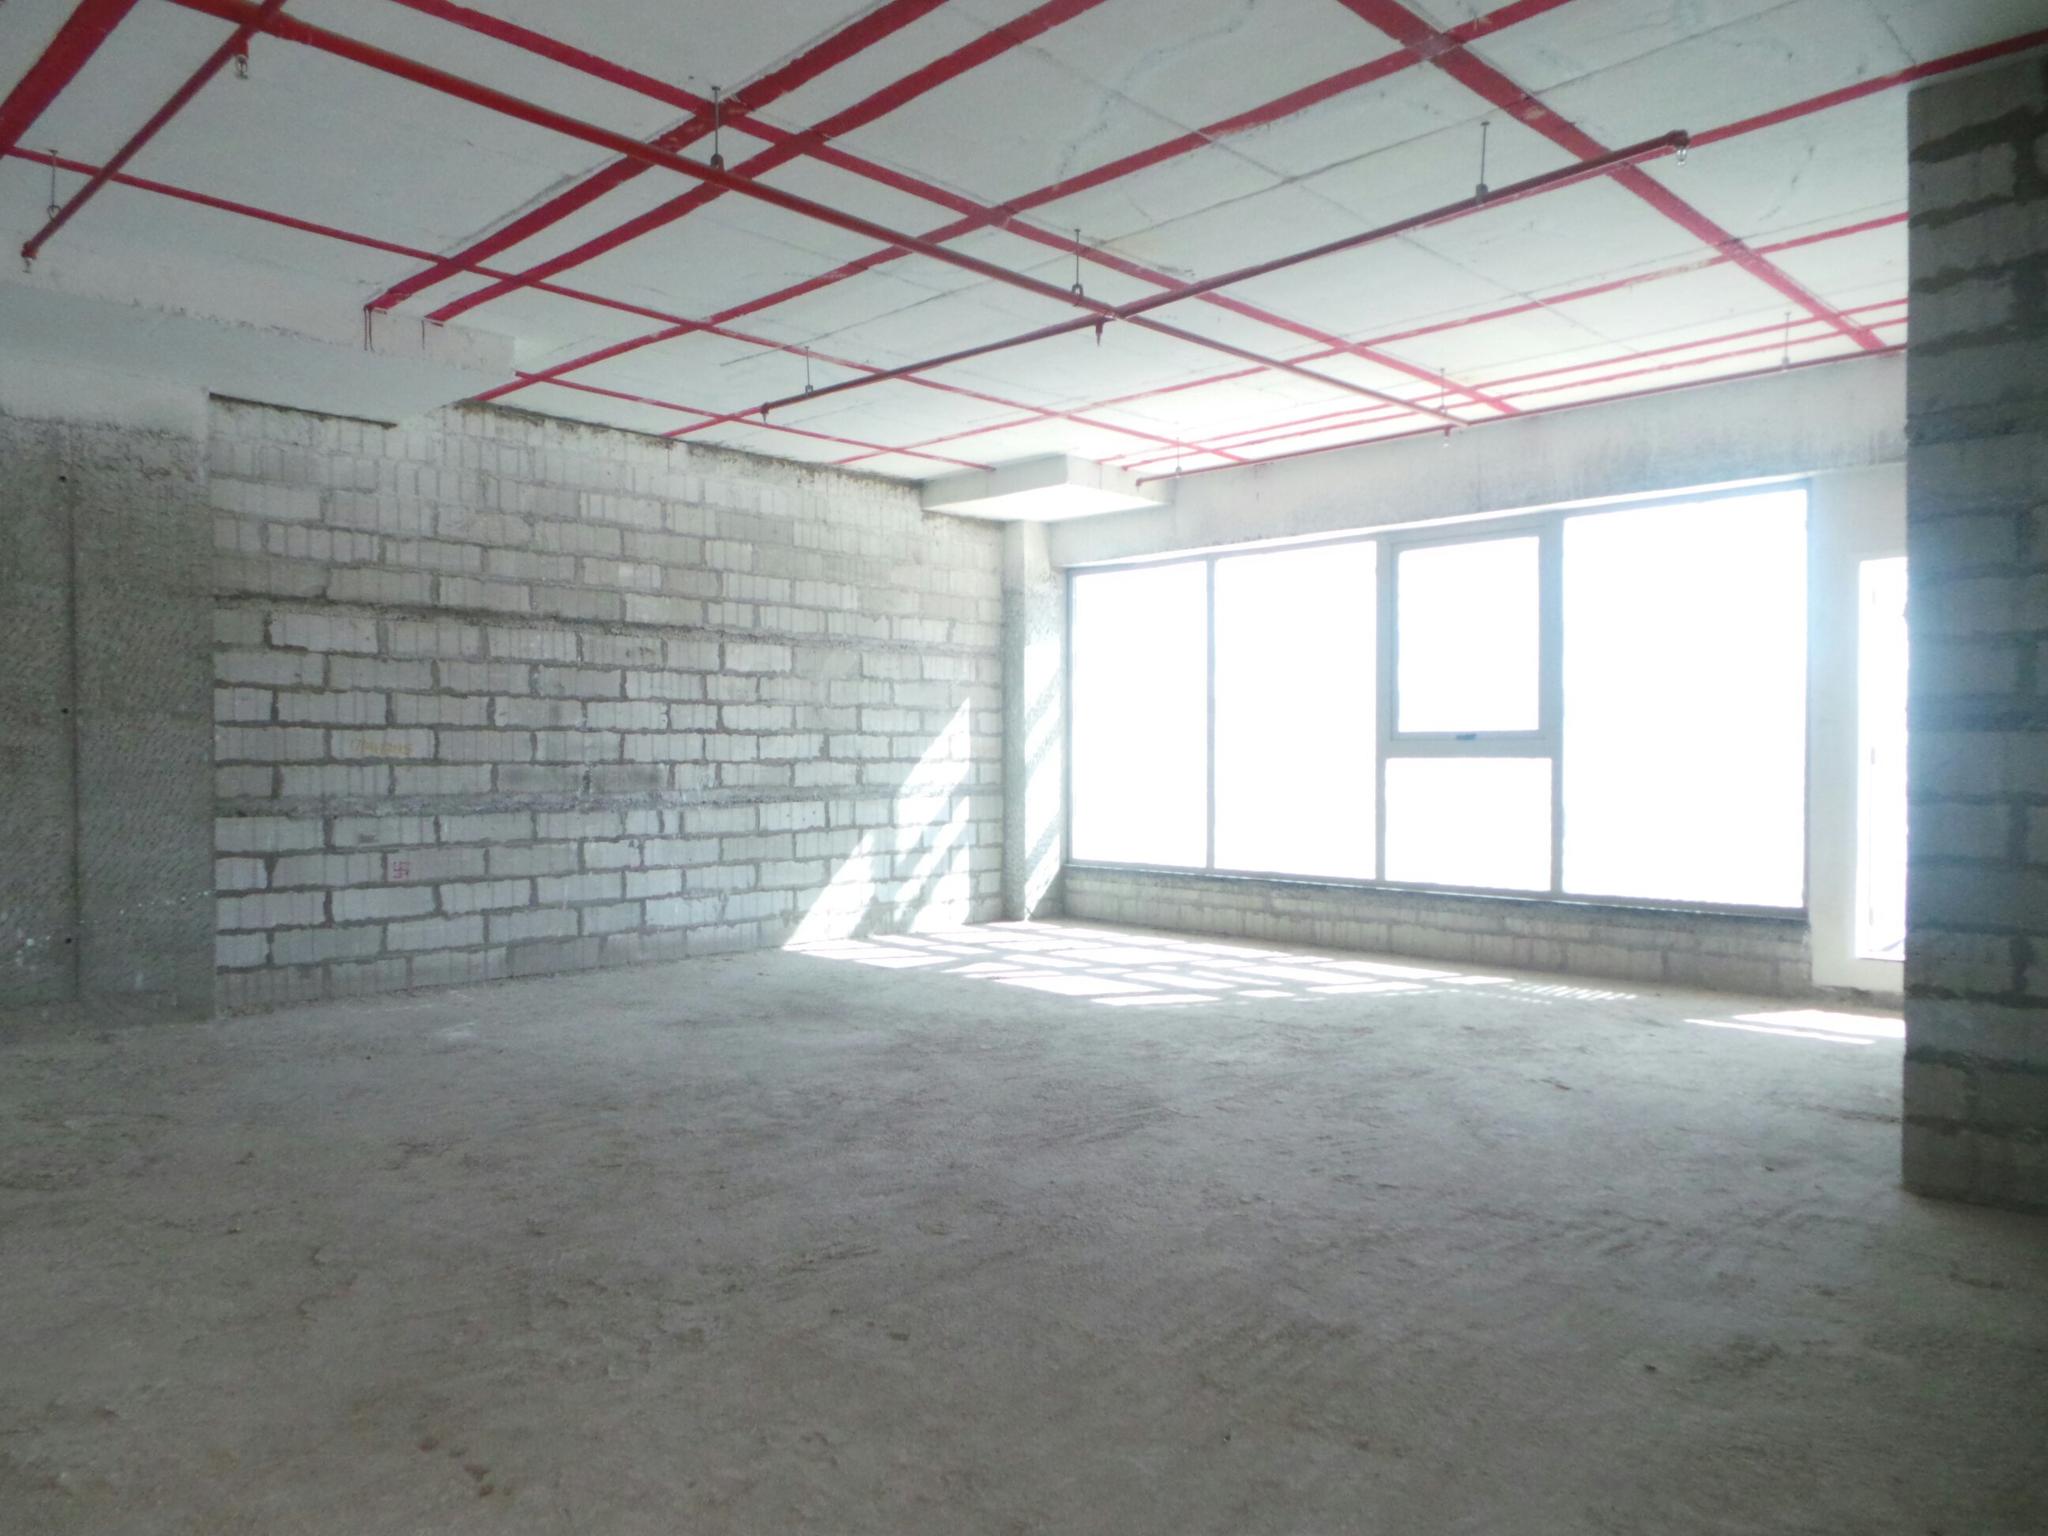 1281 Sq.Ft. Baresell Office/Space @ 79.99 Th for Rent/Lease in Baner, 